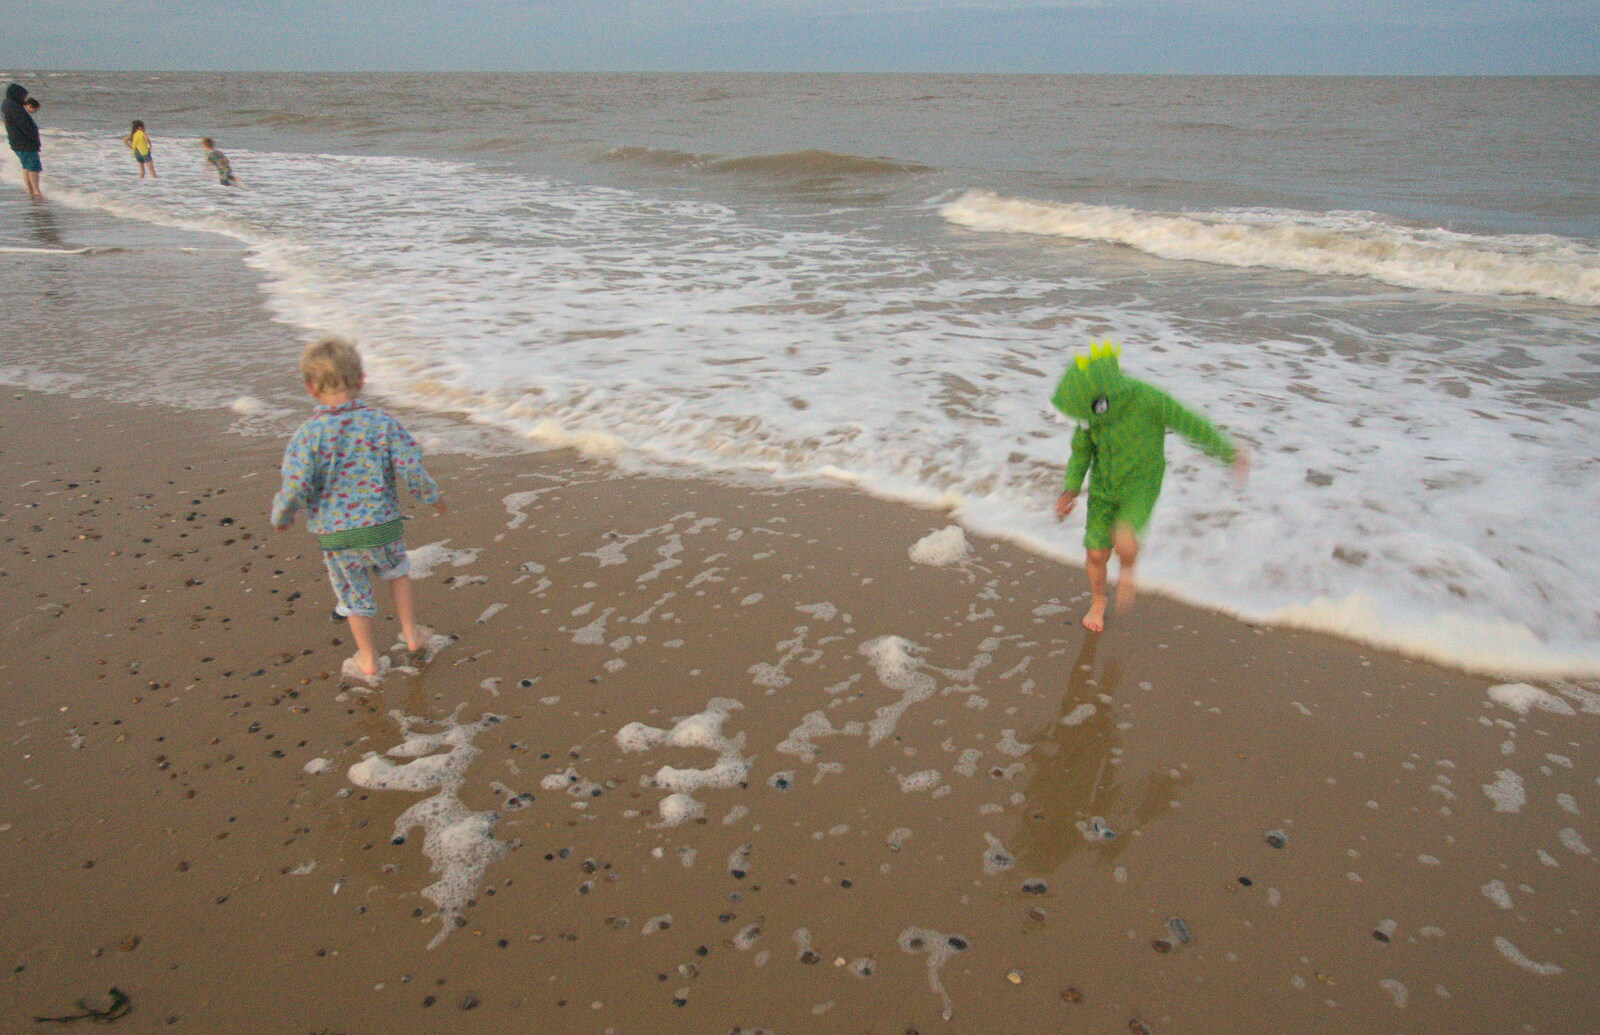 Harry and Fred in their pyjamas from The Danger of Trees: A Camping (Mis)adventure - Southwold, Suffolk - 3rd August 2015